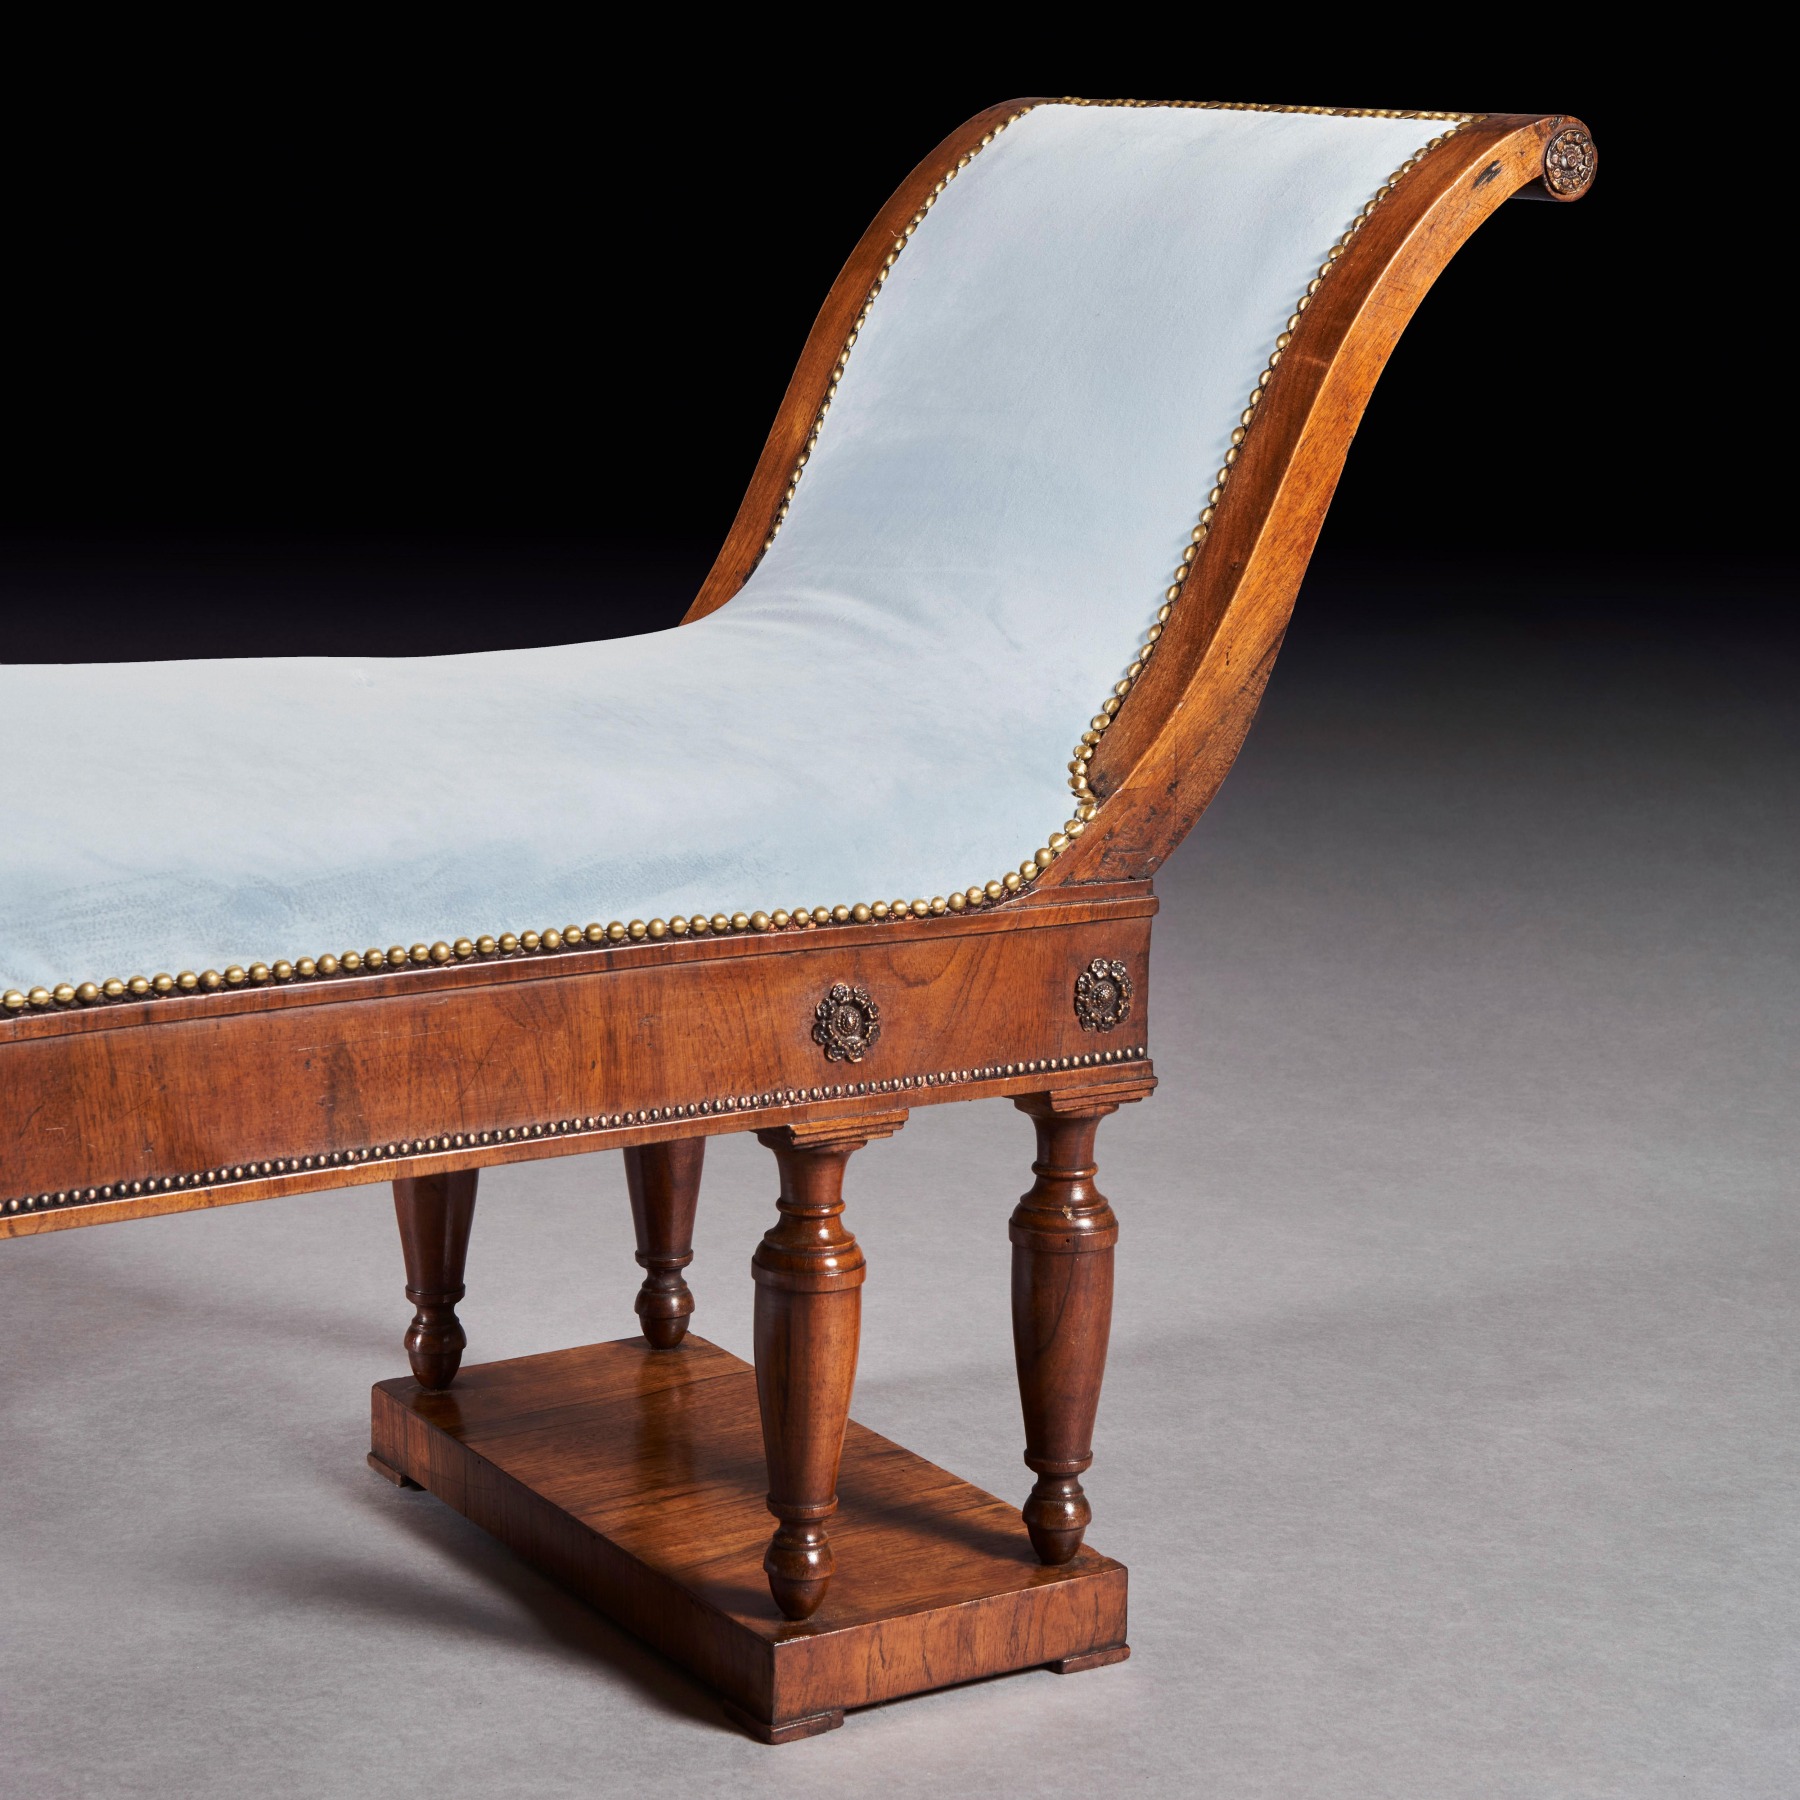 Elegant Italian Neoclassical Empire Walnut Upholstered Scroll End Bench Daybed